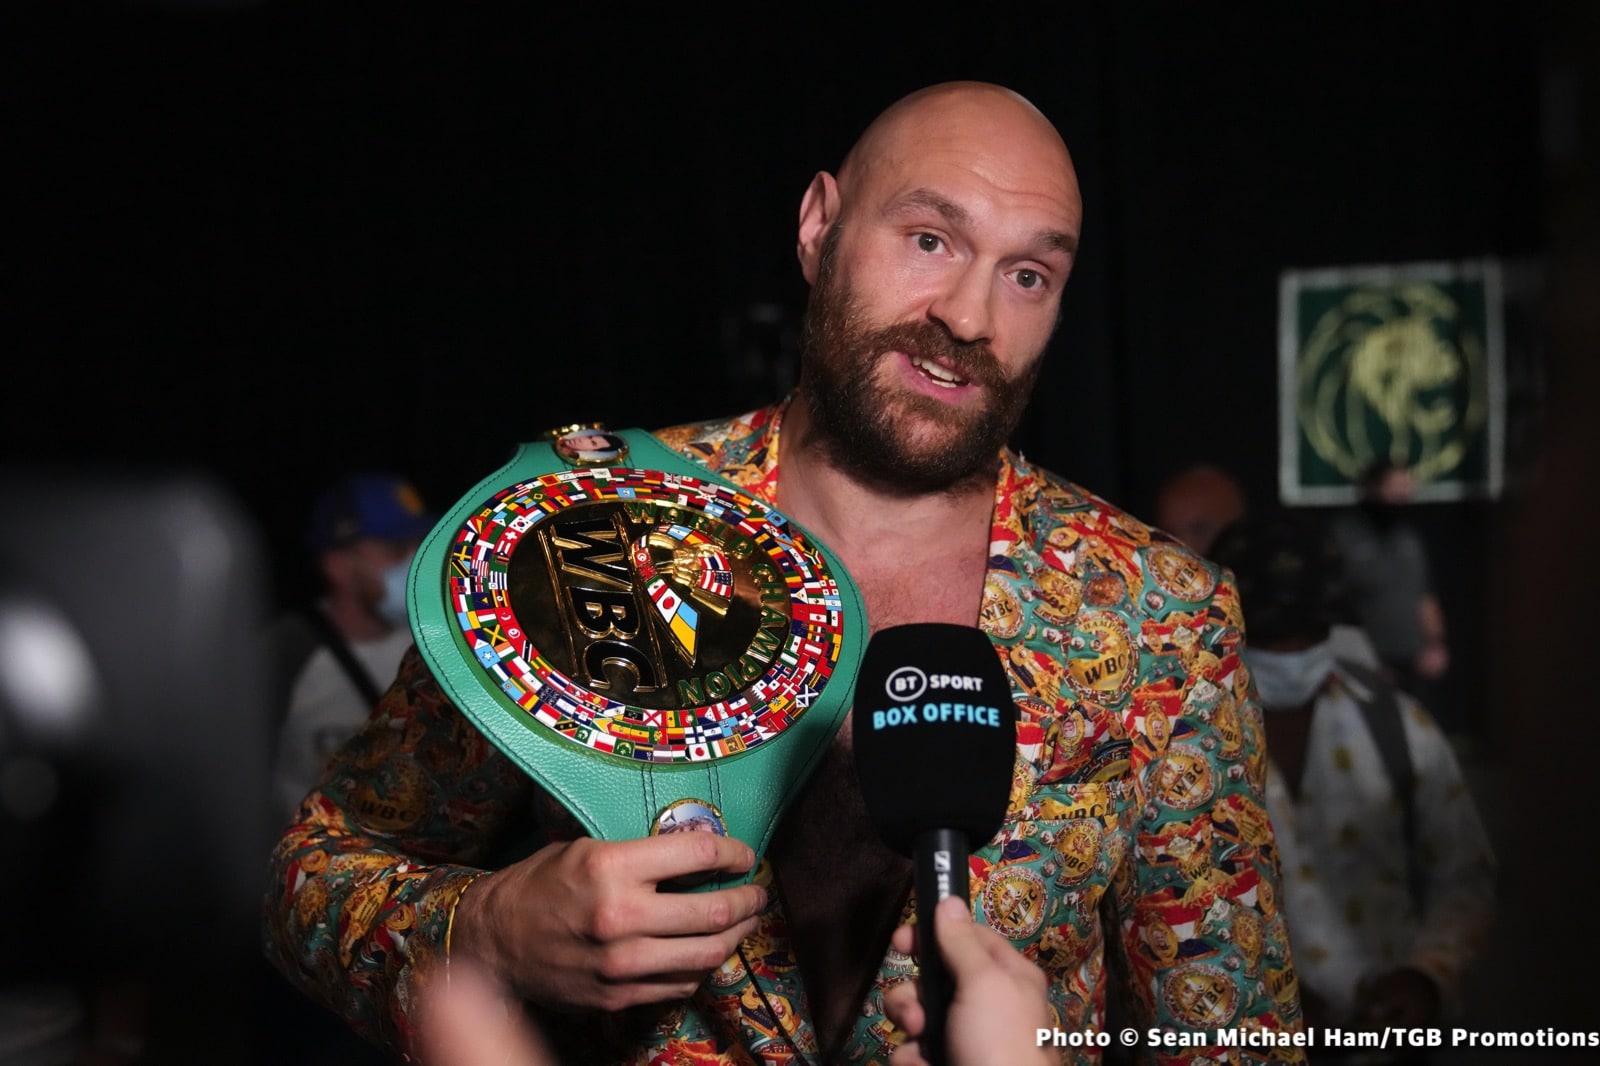 Tyson Fury Tells Ngannou To “Come See The Gypsy King If You Want To Make Real Money”